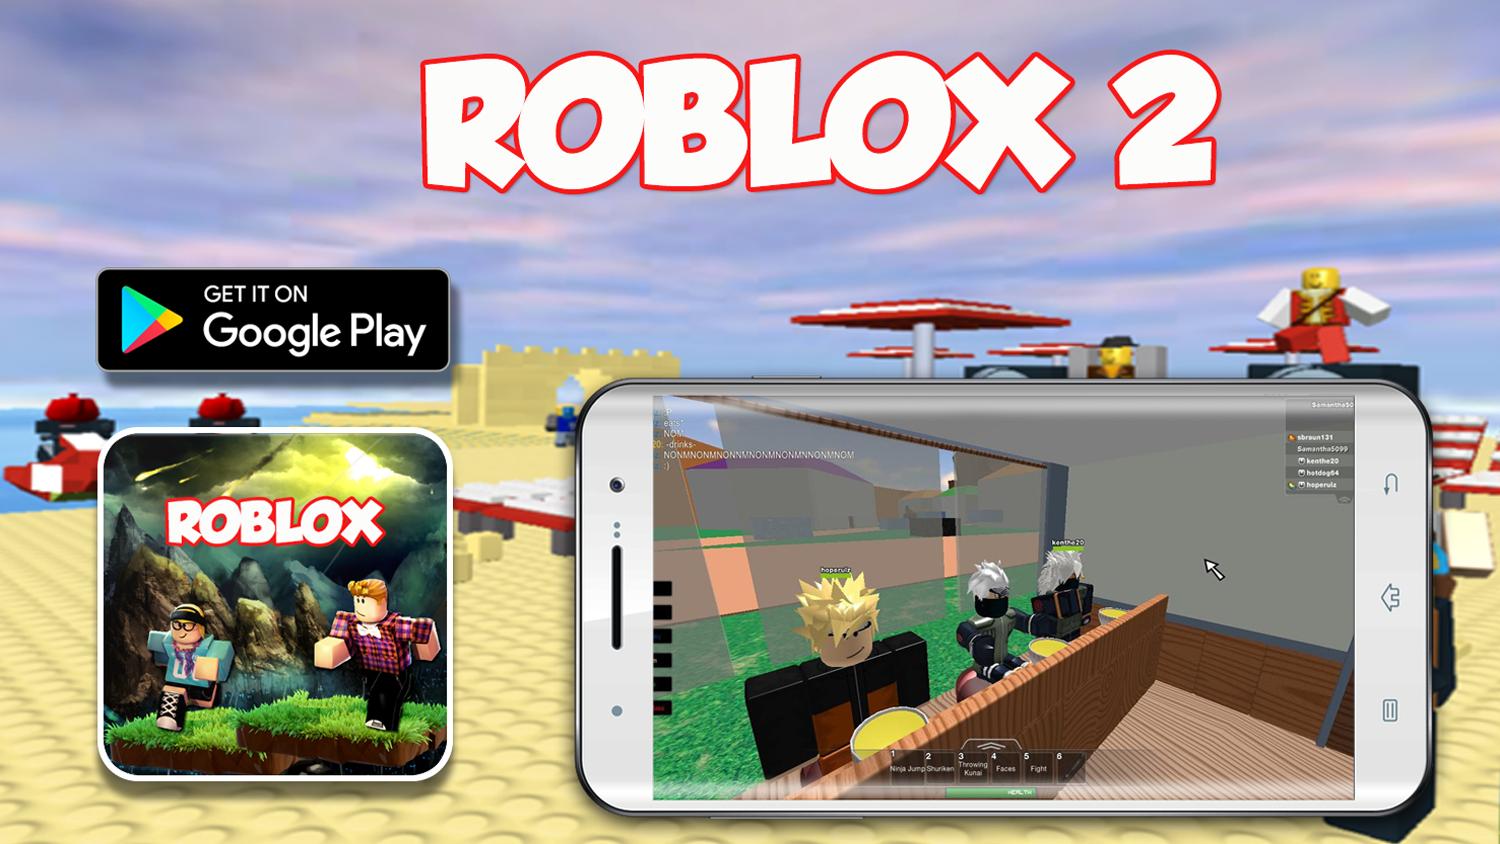 Guide For Roblox 2 Free For Android Apk Download - como baixar roblox